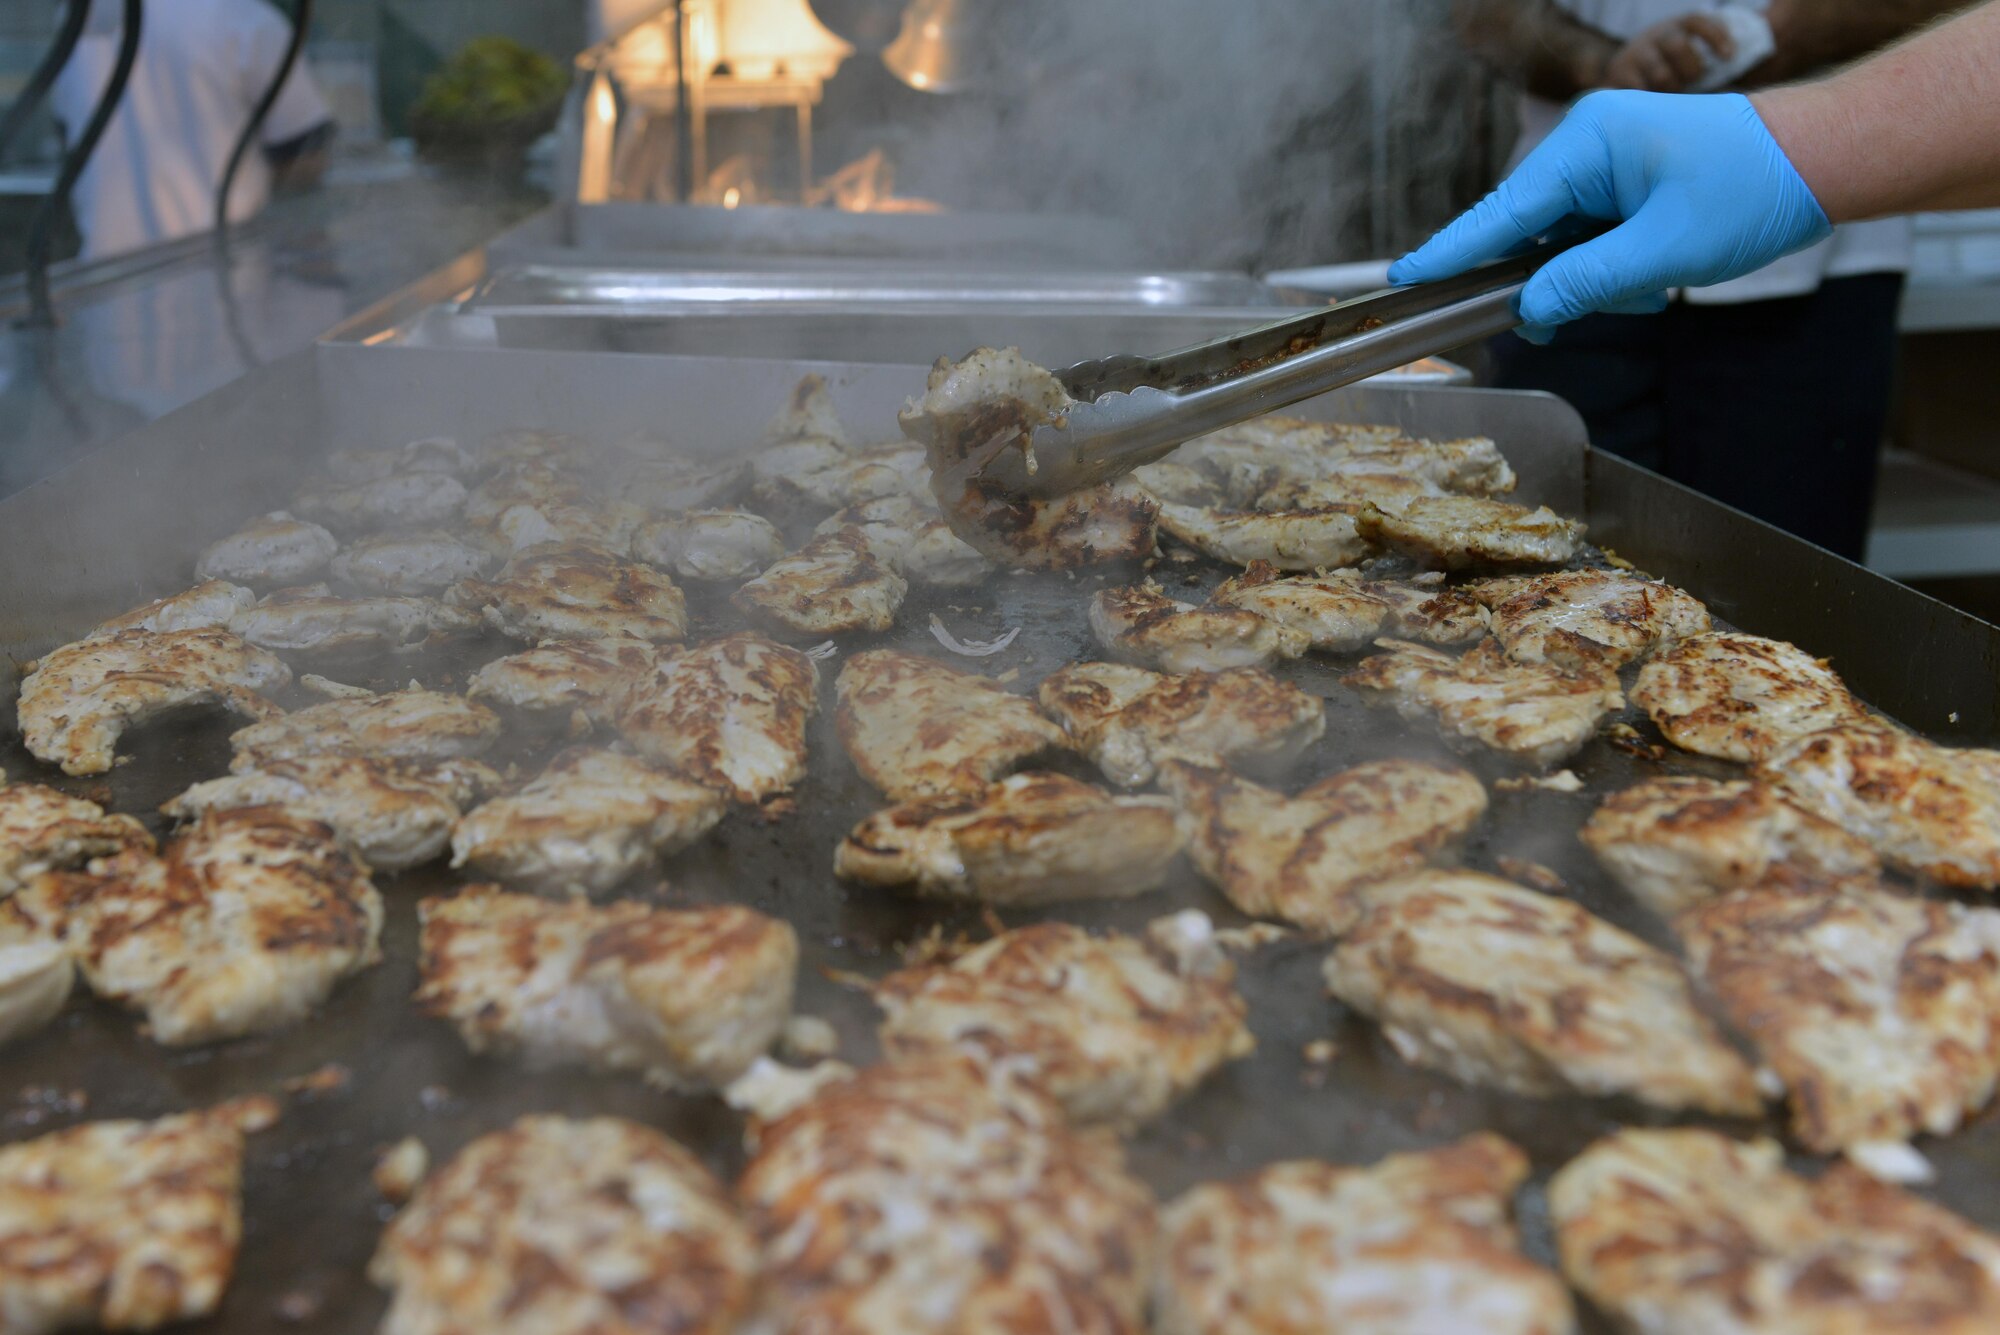 A Sultan’s Inn Dining Facility employee grills a plethora of chicken breasts in the Sultan’s Inn Dining Facility July 21, 2016, at Incirlik Air Base, Turkey. Grilled chicken breasts, along with pot roast, chicken a la king and steak and cheese sandwiches were some of the featured entrees. (U.S. Air Force photo by Senior Airman John Nieves Camacho)